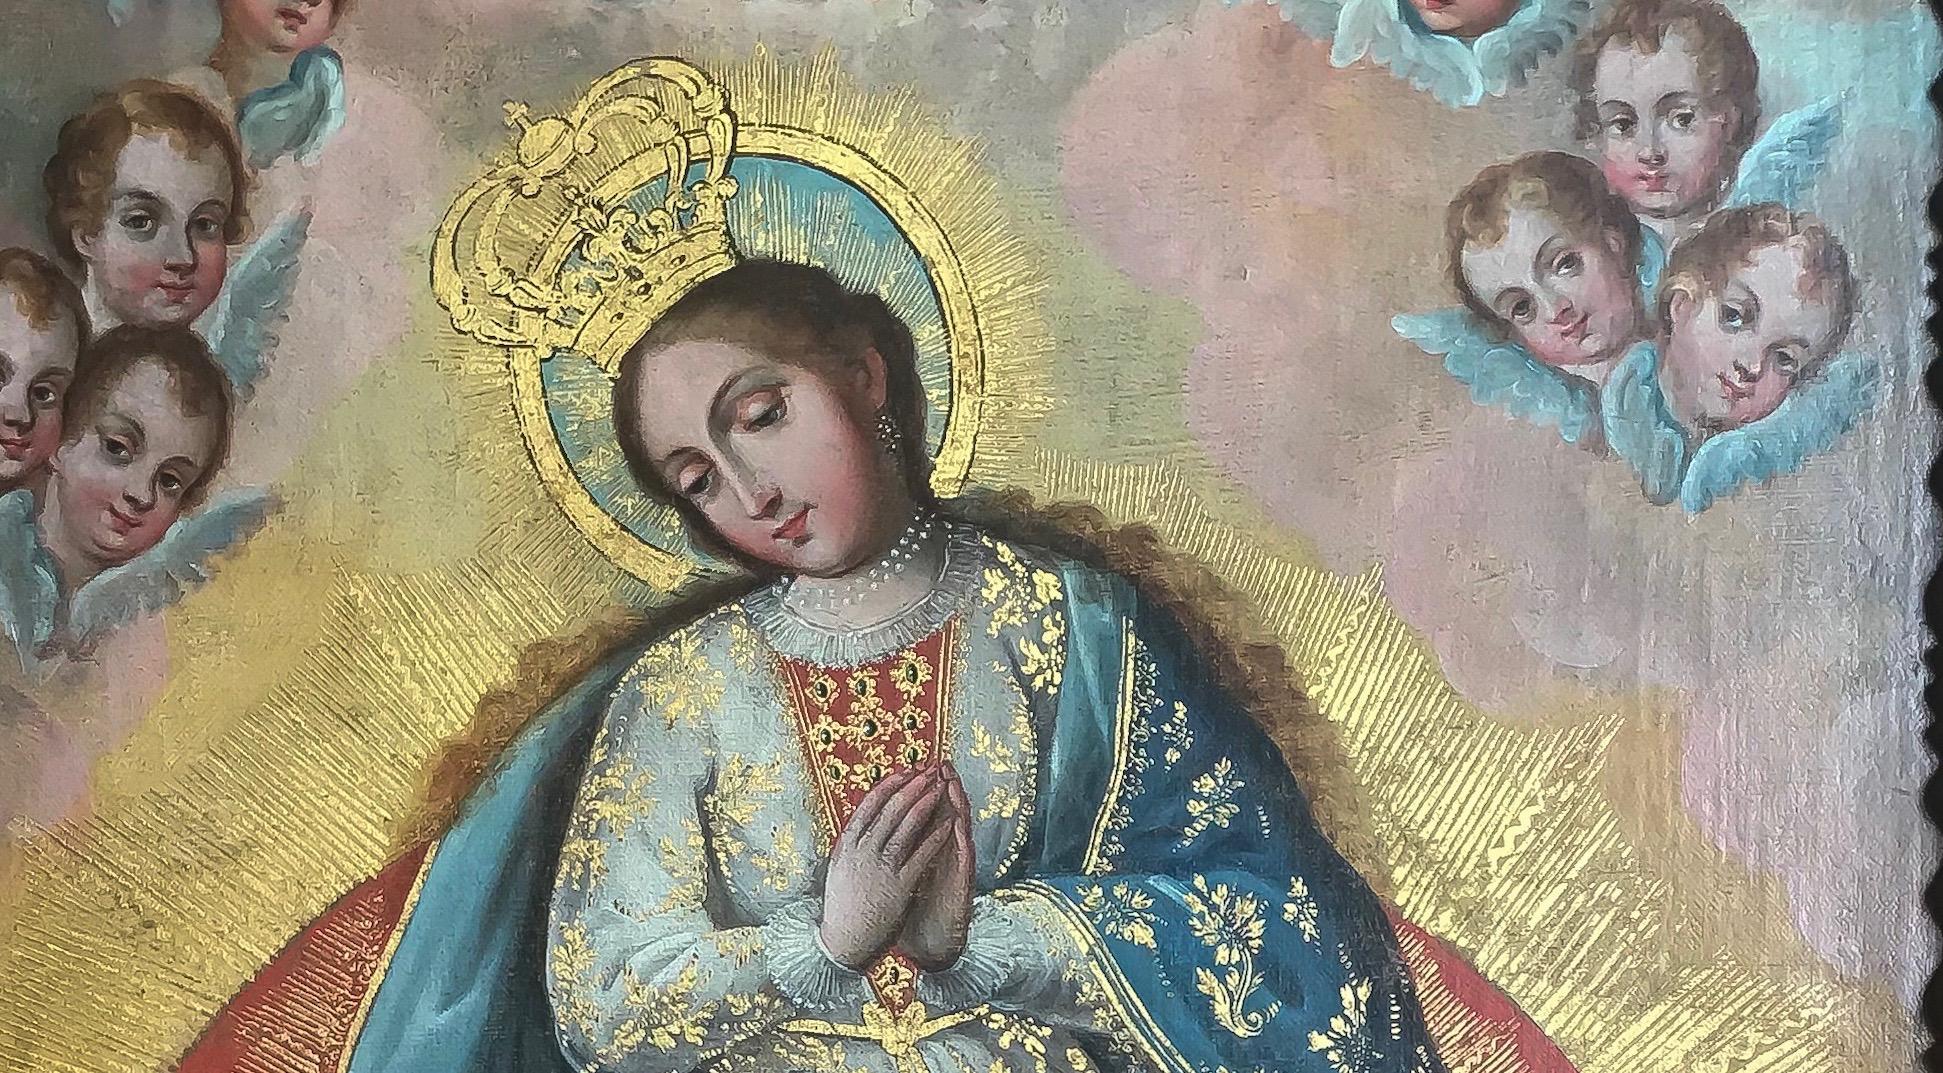 Patron of the Archdiocese of Tulancingo, Hidalgo, Our Lady of the Angels is a Marian advocation of Spanish origin that arrived in America from the beginning of the Viceroyalty period
The Virgin Mary, who seems to be pregnant, puts her feet on